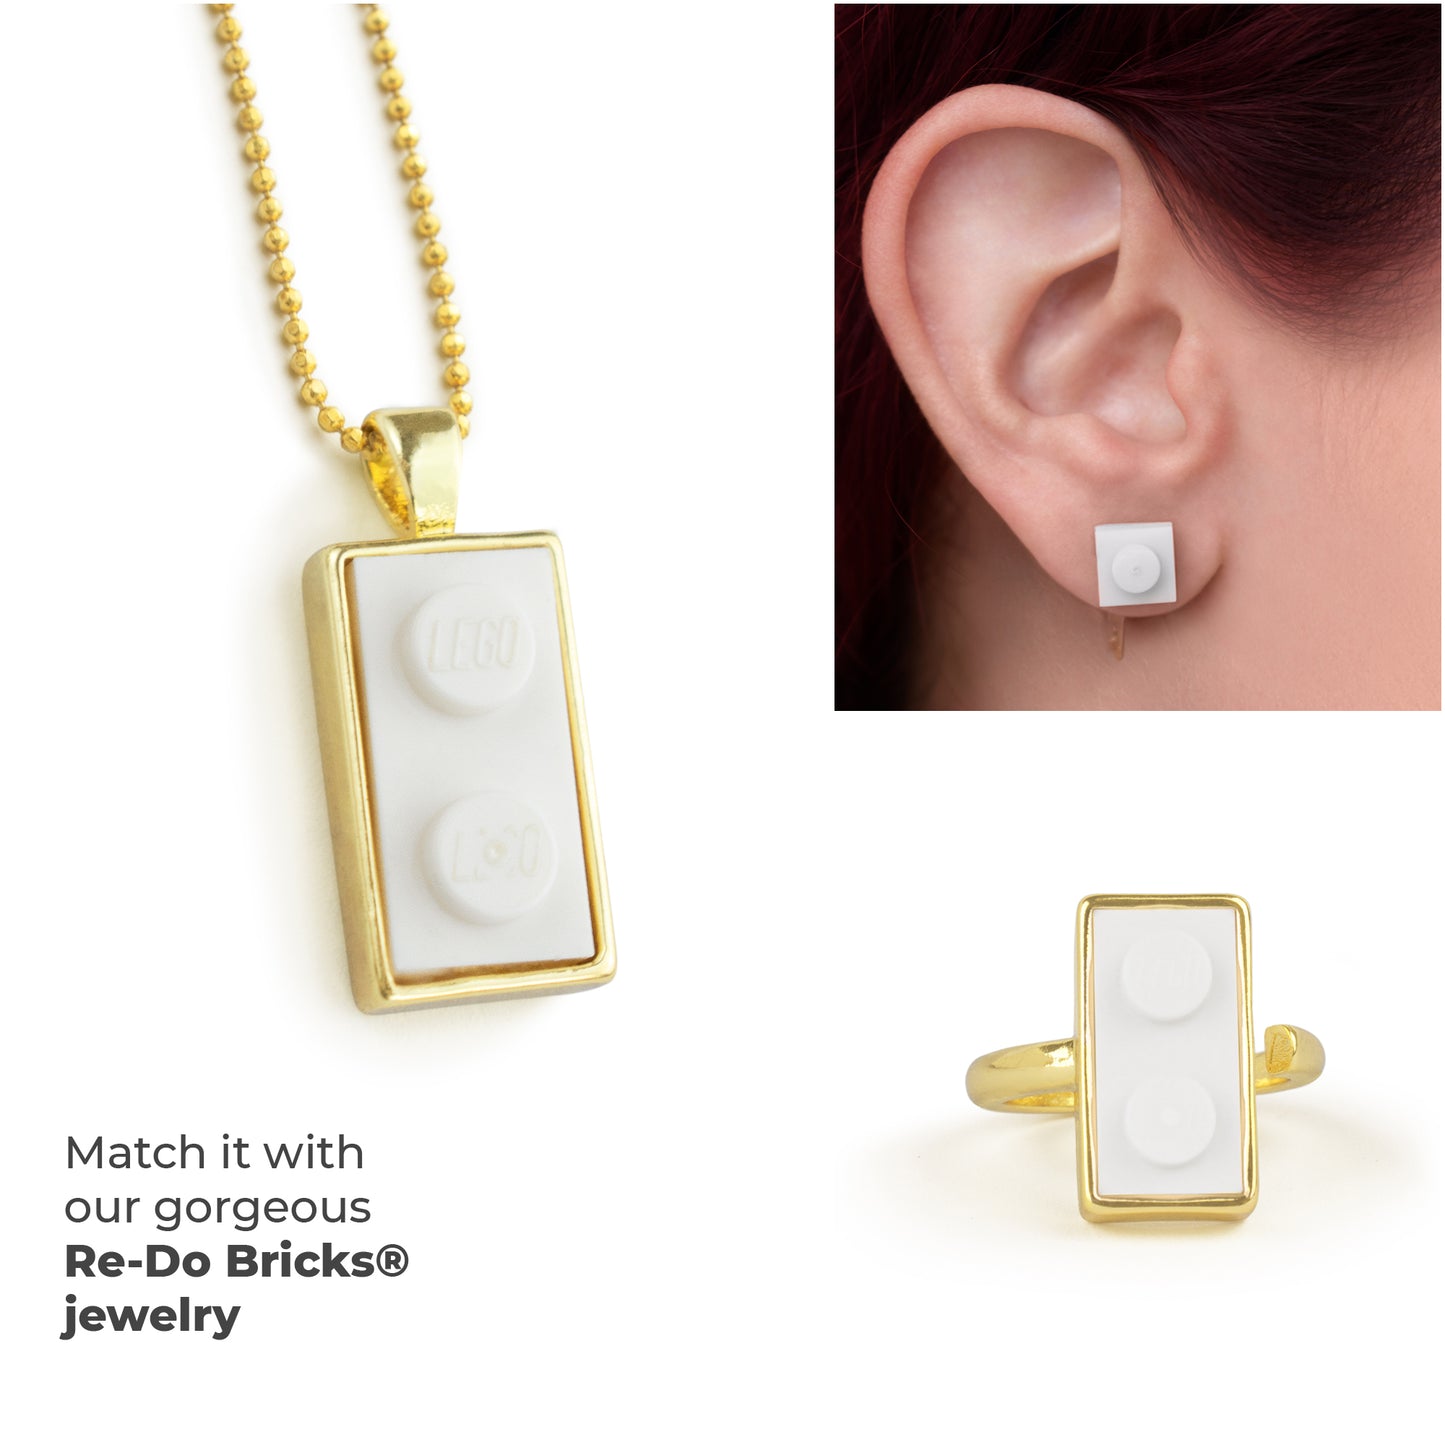 Twin White Brick Charm with Gold Plated Chain